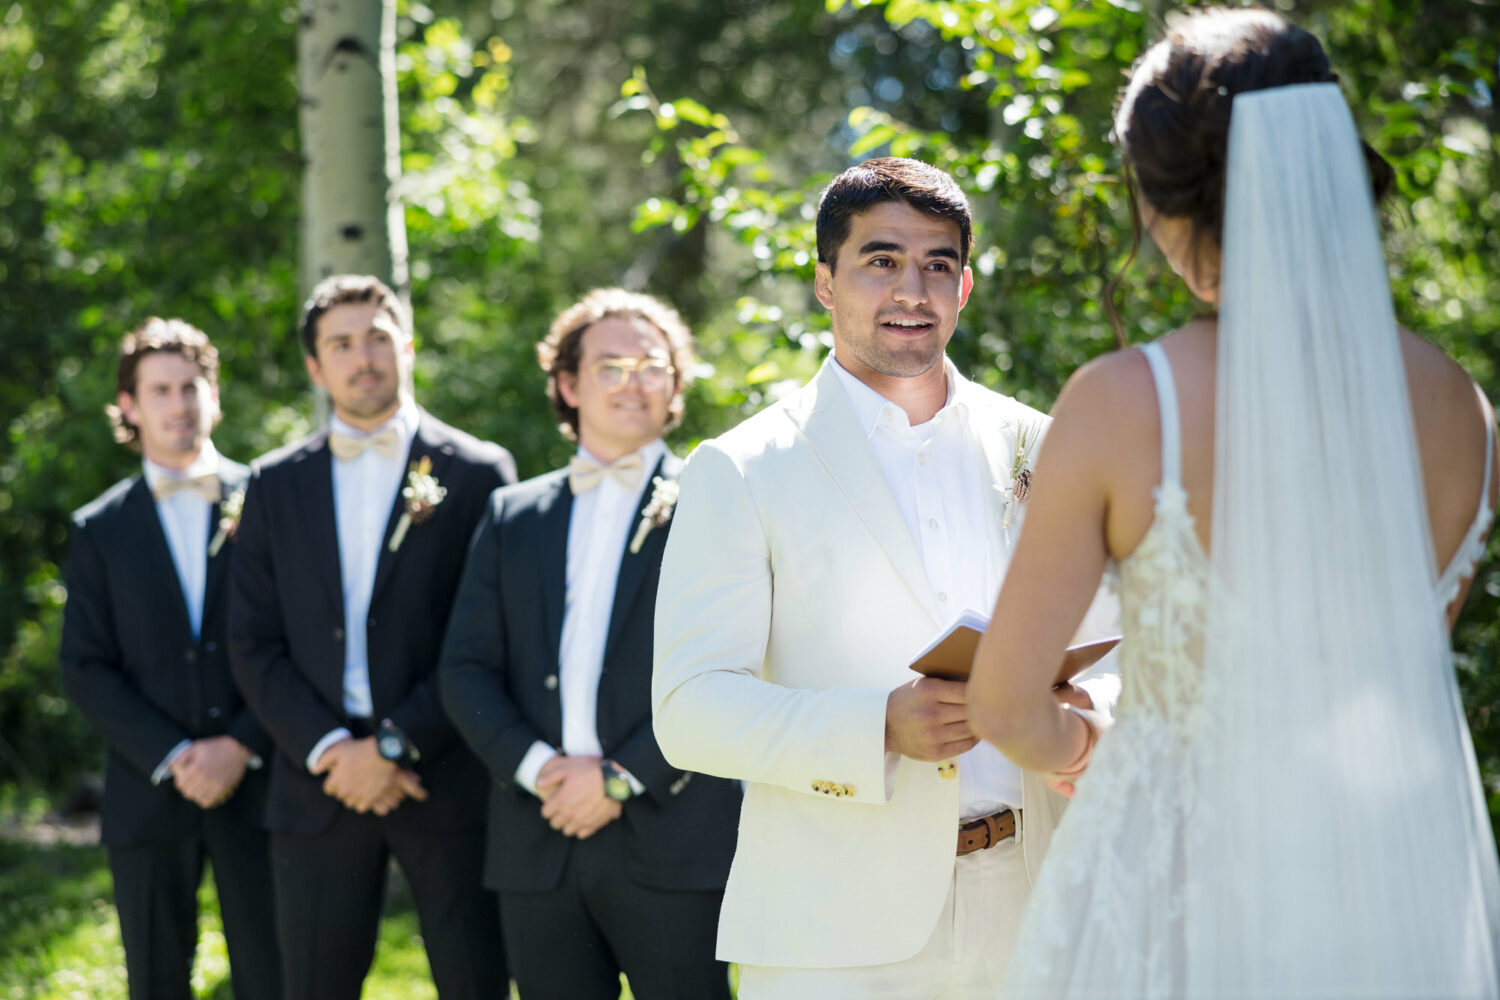 A groom reads aloud from a small notebook for personalized wedding vows.